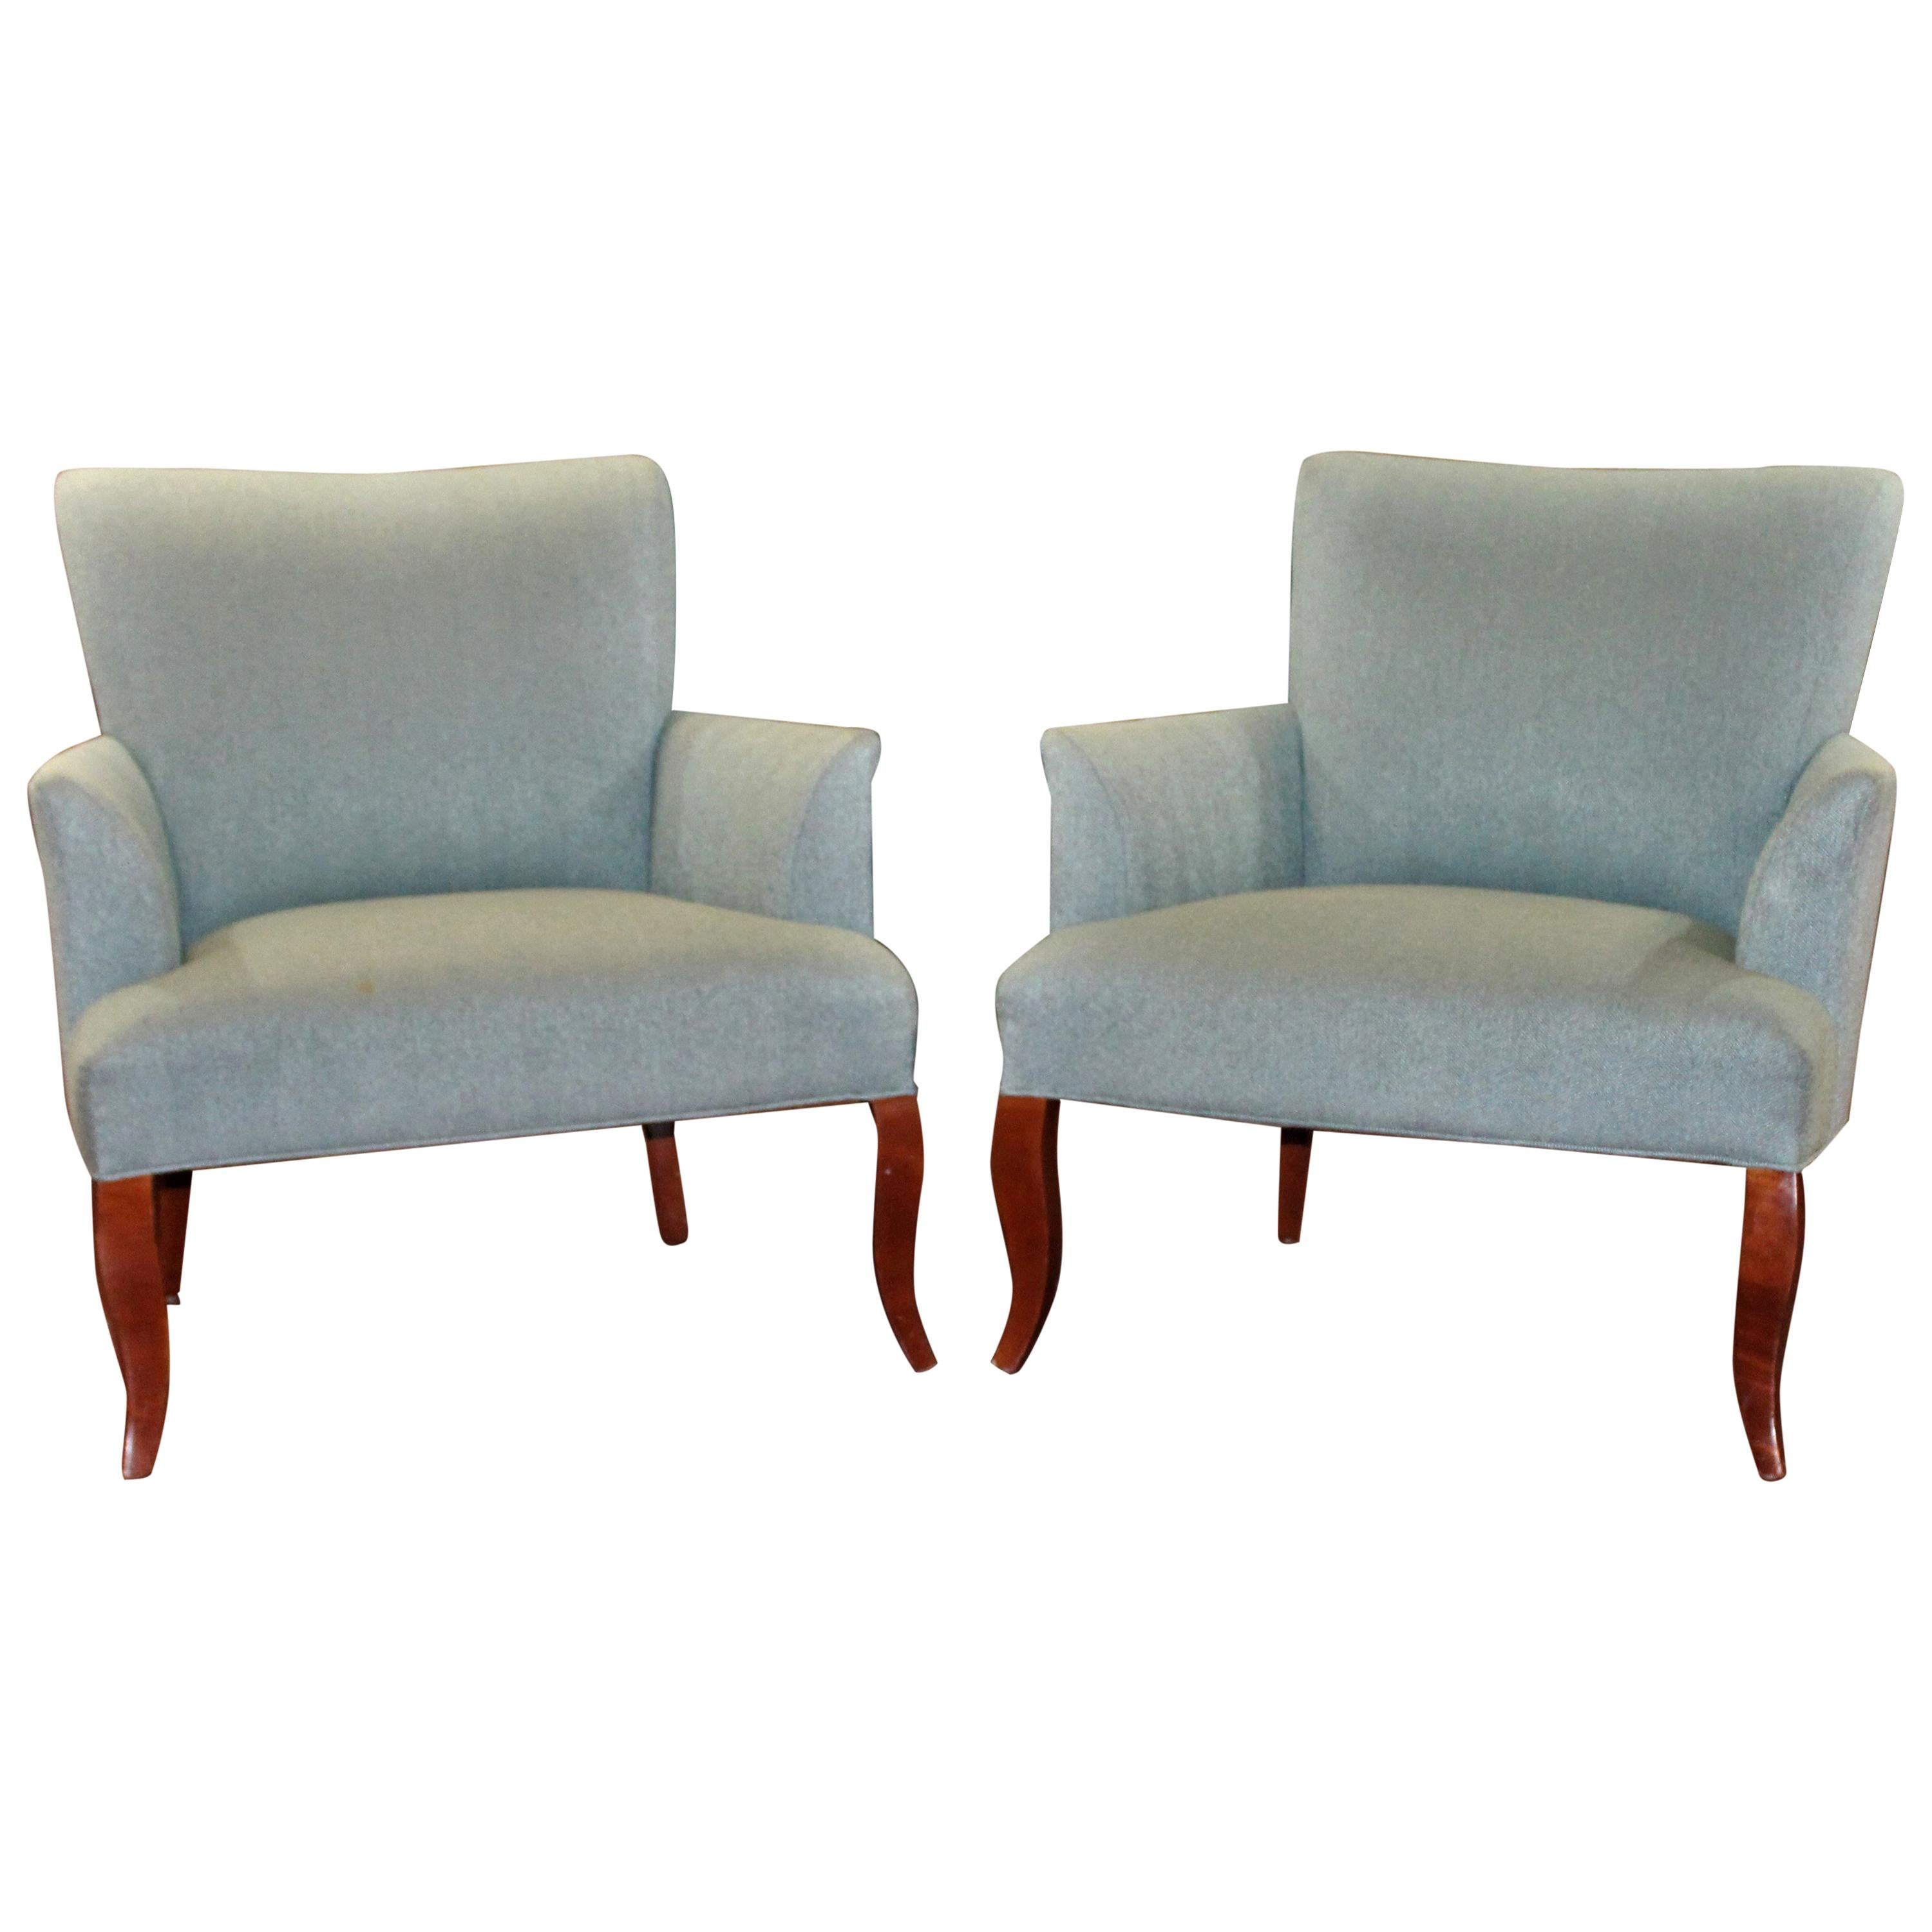 Stately Pair of Powder Blue Armchairs